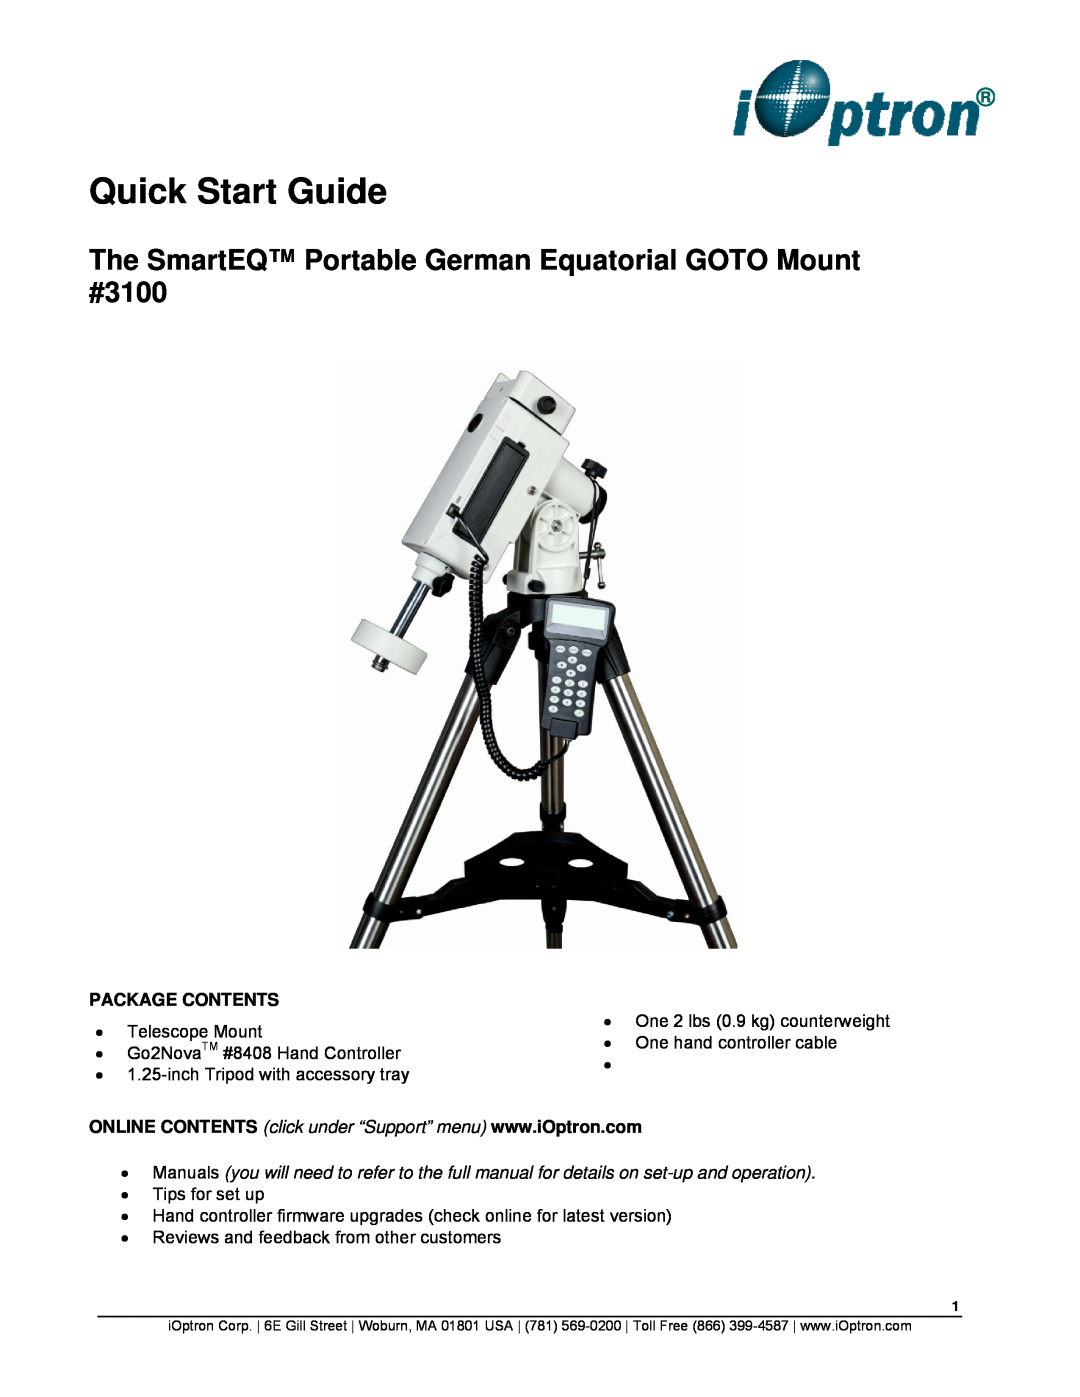 iOptron quick start Package Contents, Quick Start Guide, The SmartEQ Portable German Equatorial GOTO Mount #3100 